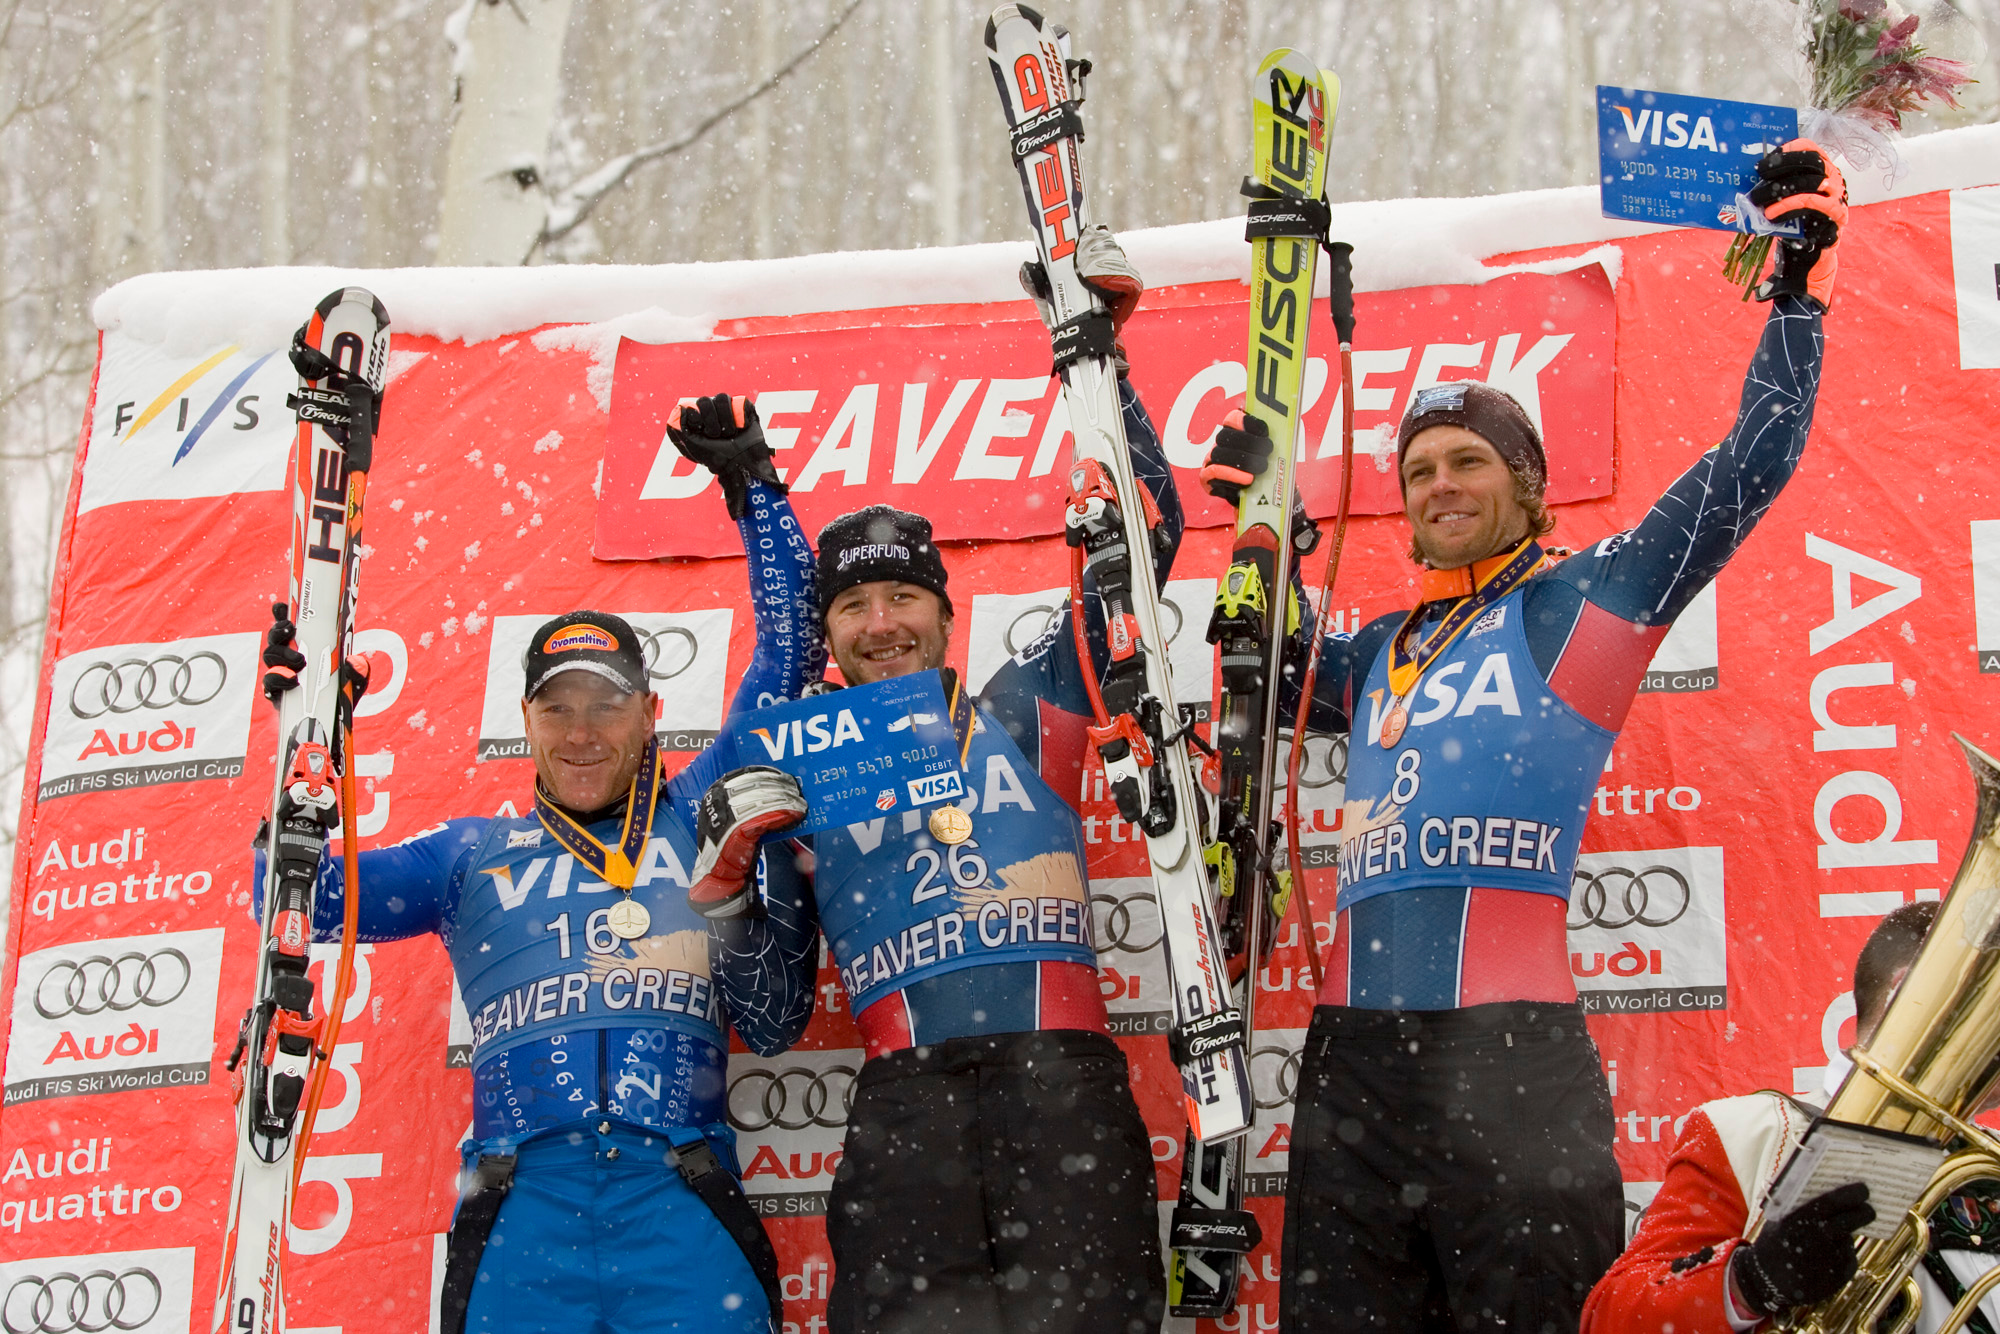 Bode Miller and Steven Nyman Share the Podium at Beaver Creek in 2006